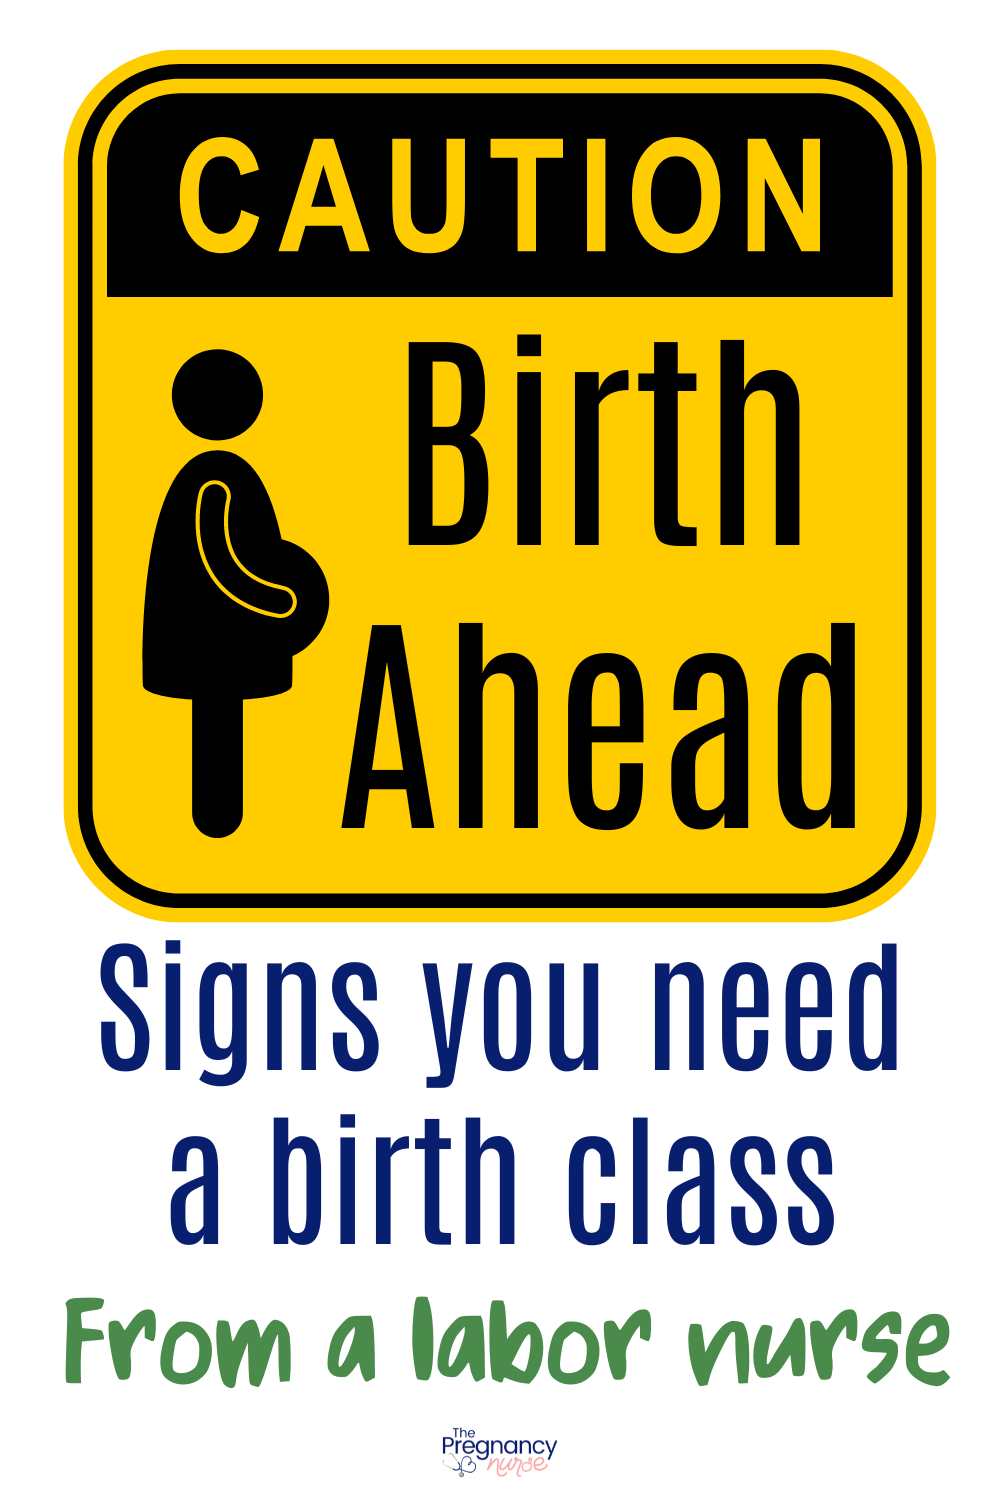 caution sign that says : BIRTH AHEAD and a pregnant woman icon // signs you need a birth class from a labor nurse